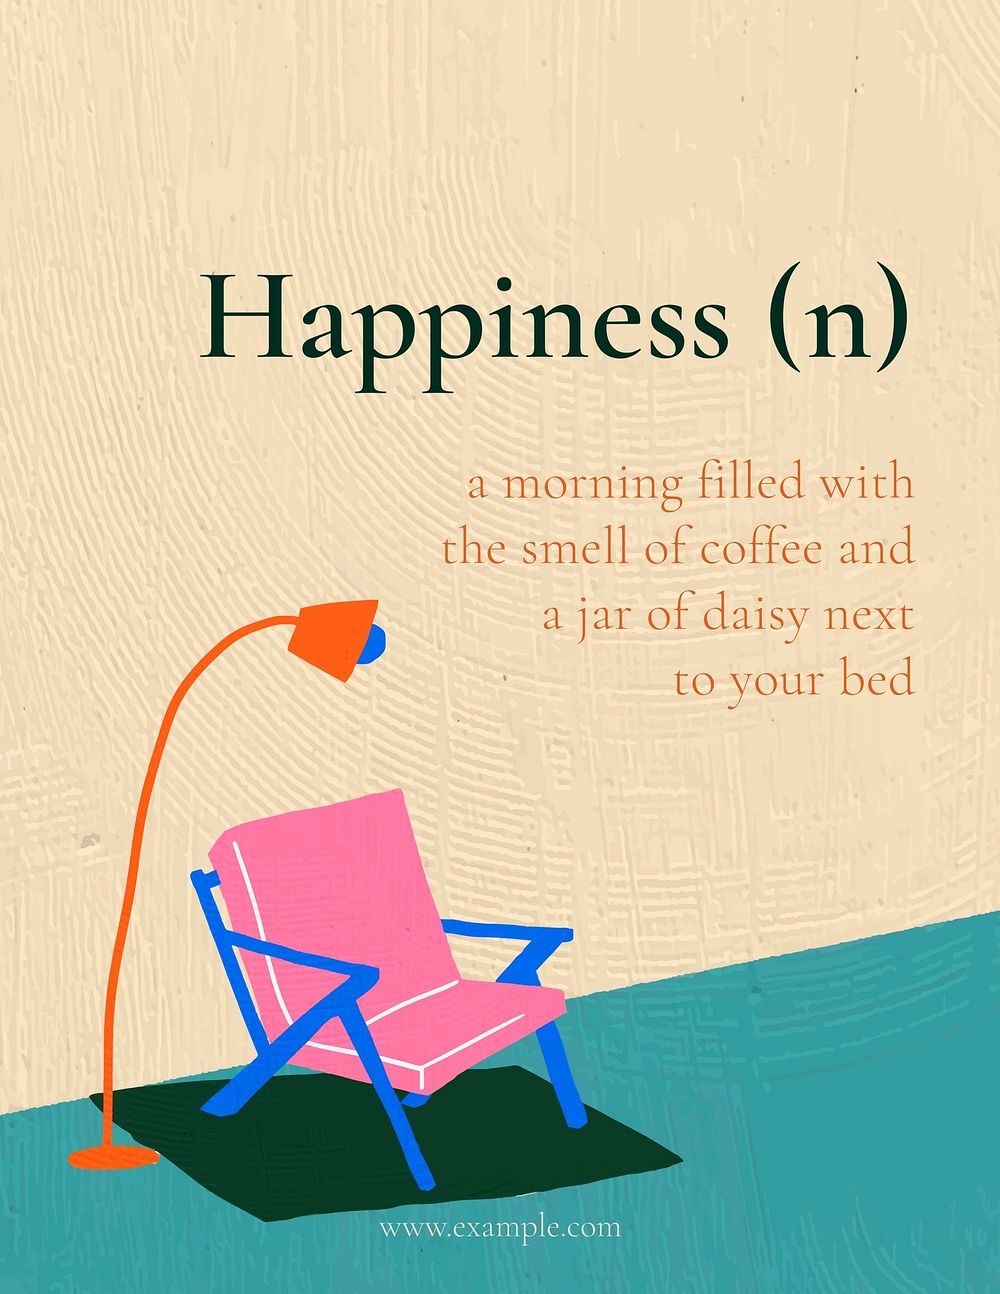 Happiness definition flyer